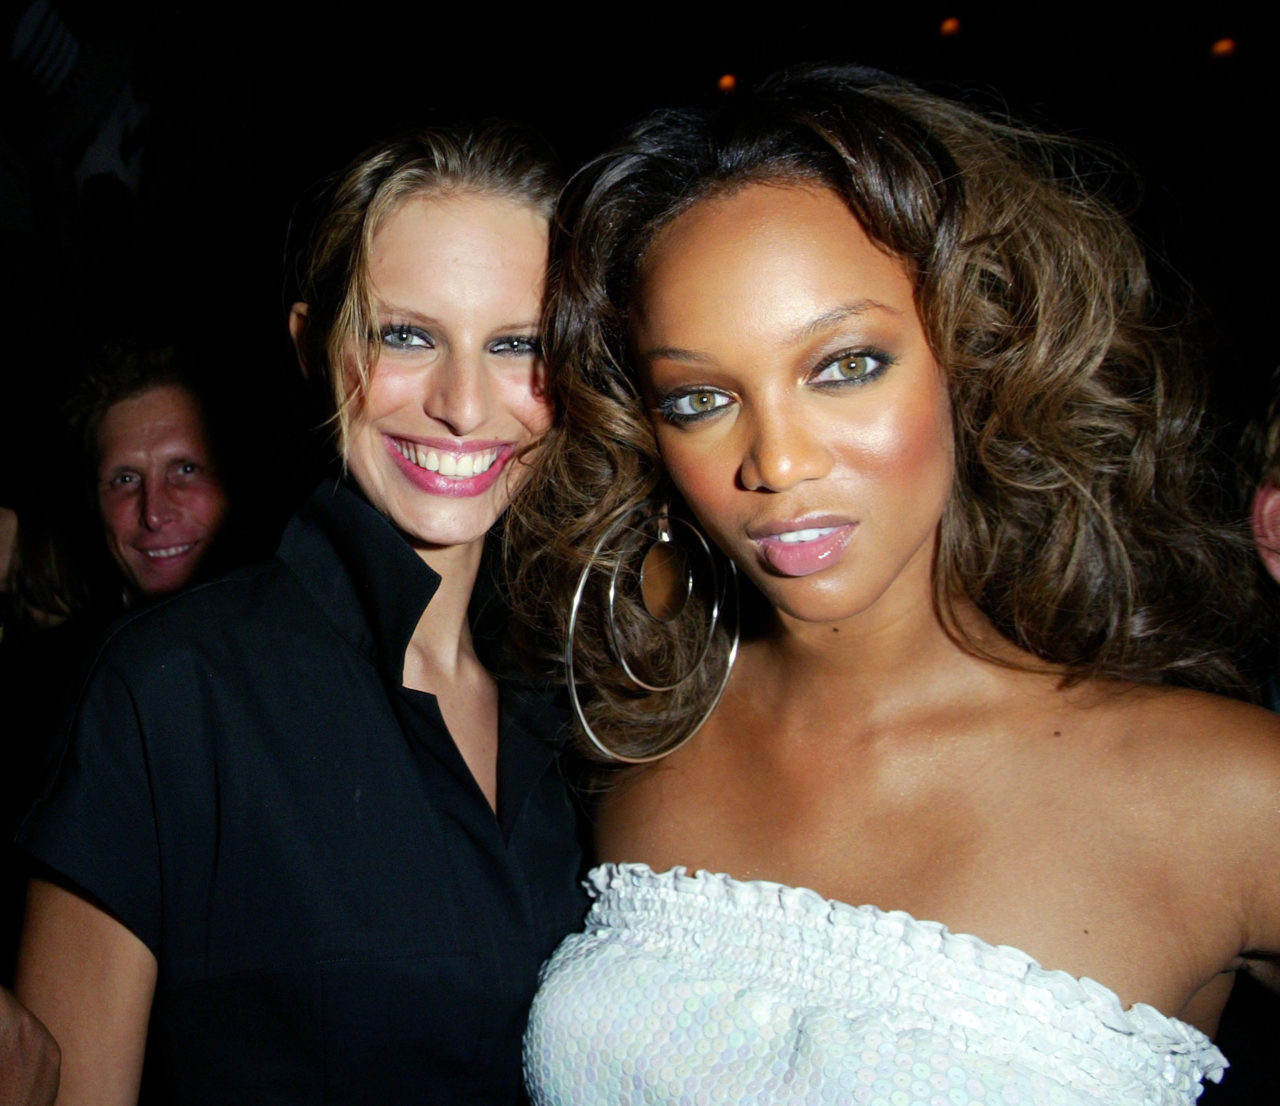 NEW YORK - OCTOBER 15: (TABLOIDS OUT) Model Karolina Kurkova (L) poses with model Tyra Banks at the 2002 VH1/Vogue Fashion Awards Afterparty at Hudson Hotel Cafeteria on October 15, 2002 in New York City. (Photo by Matthew Peyton/Getty Images)